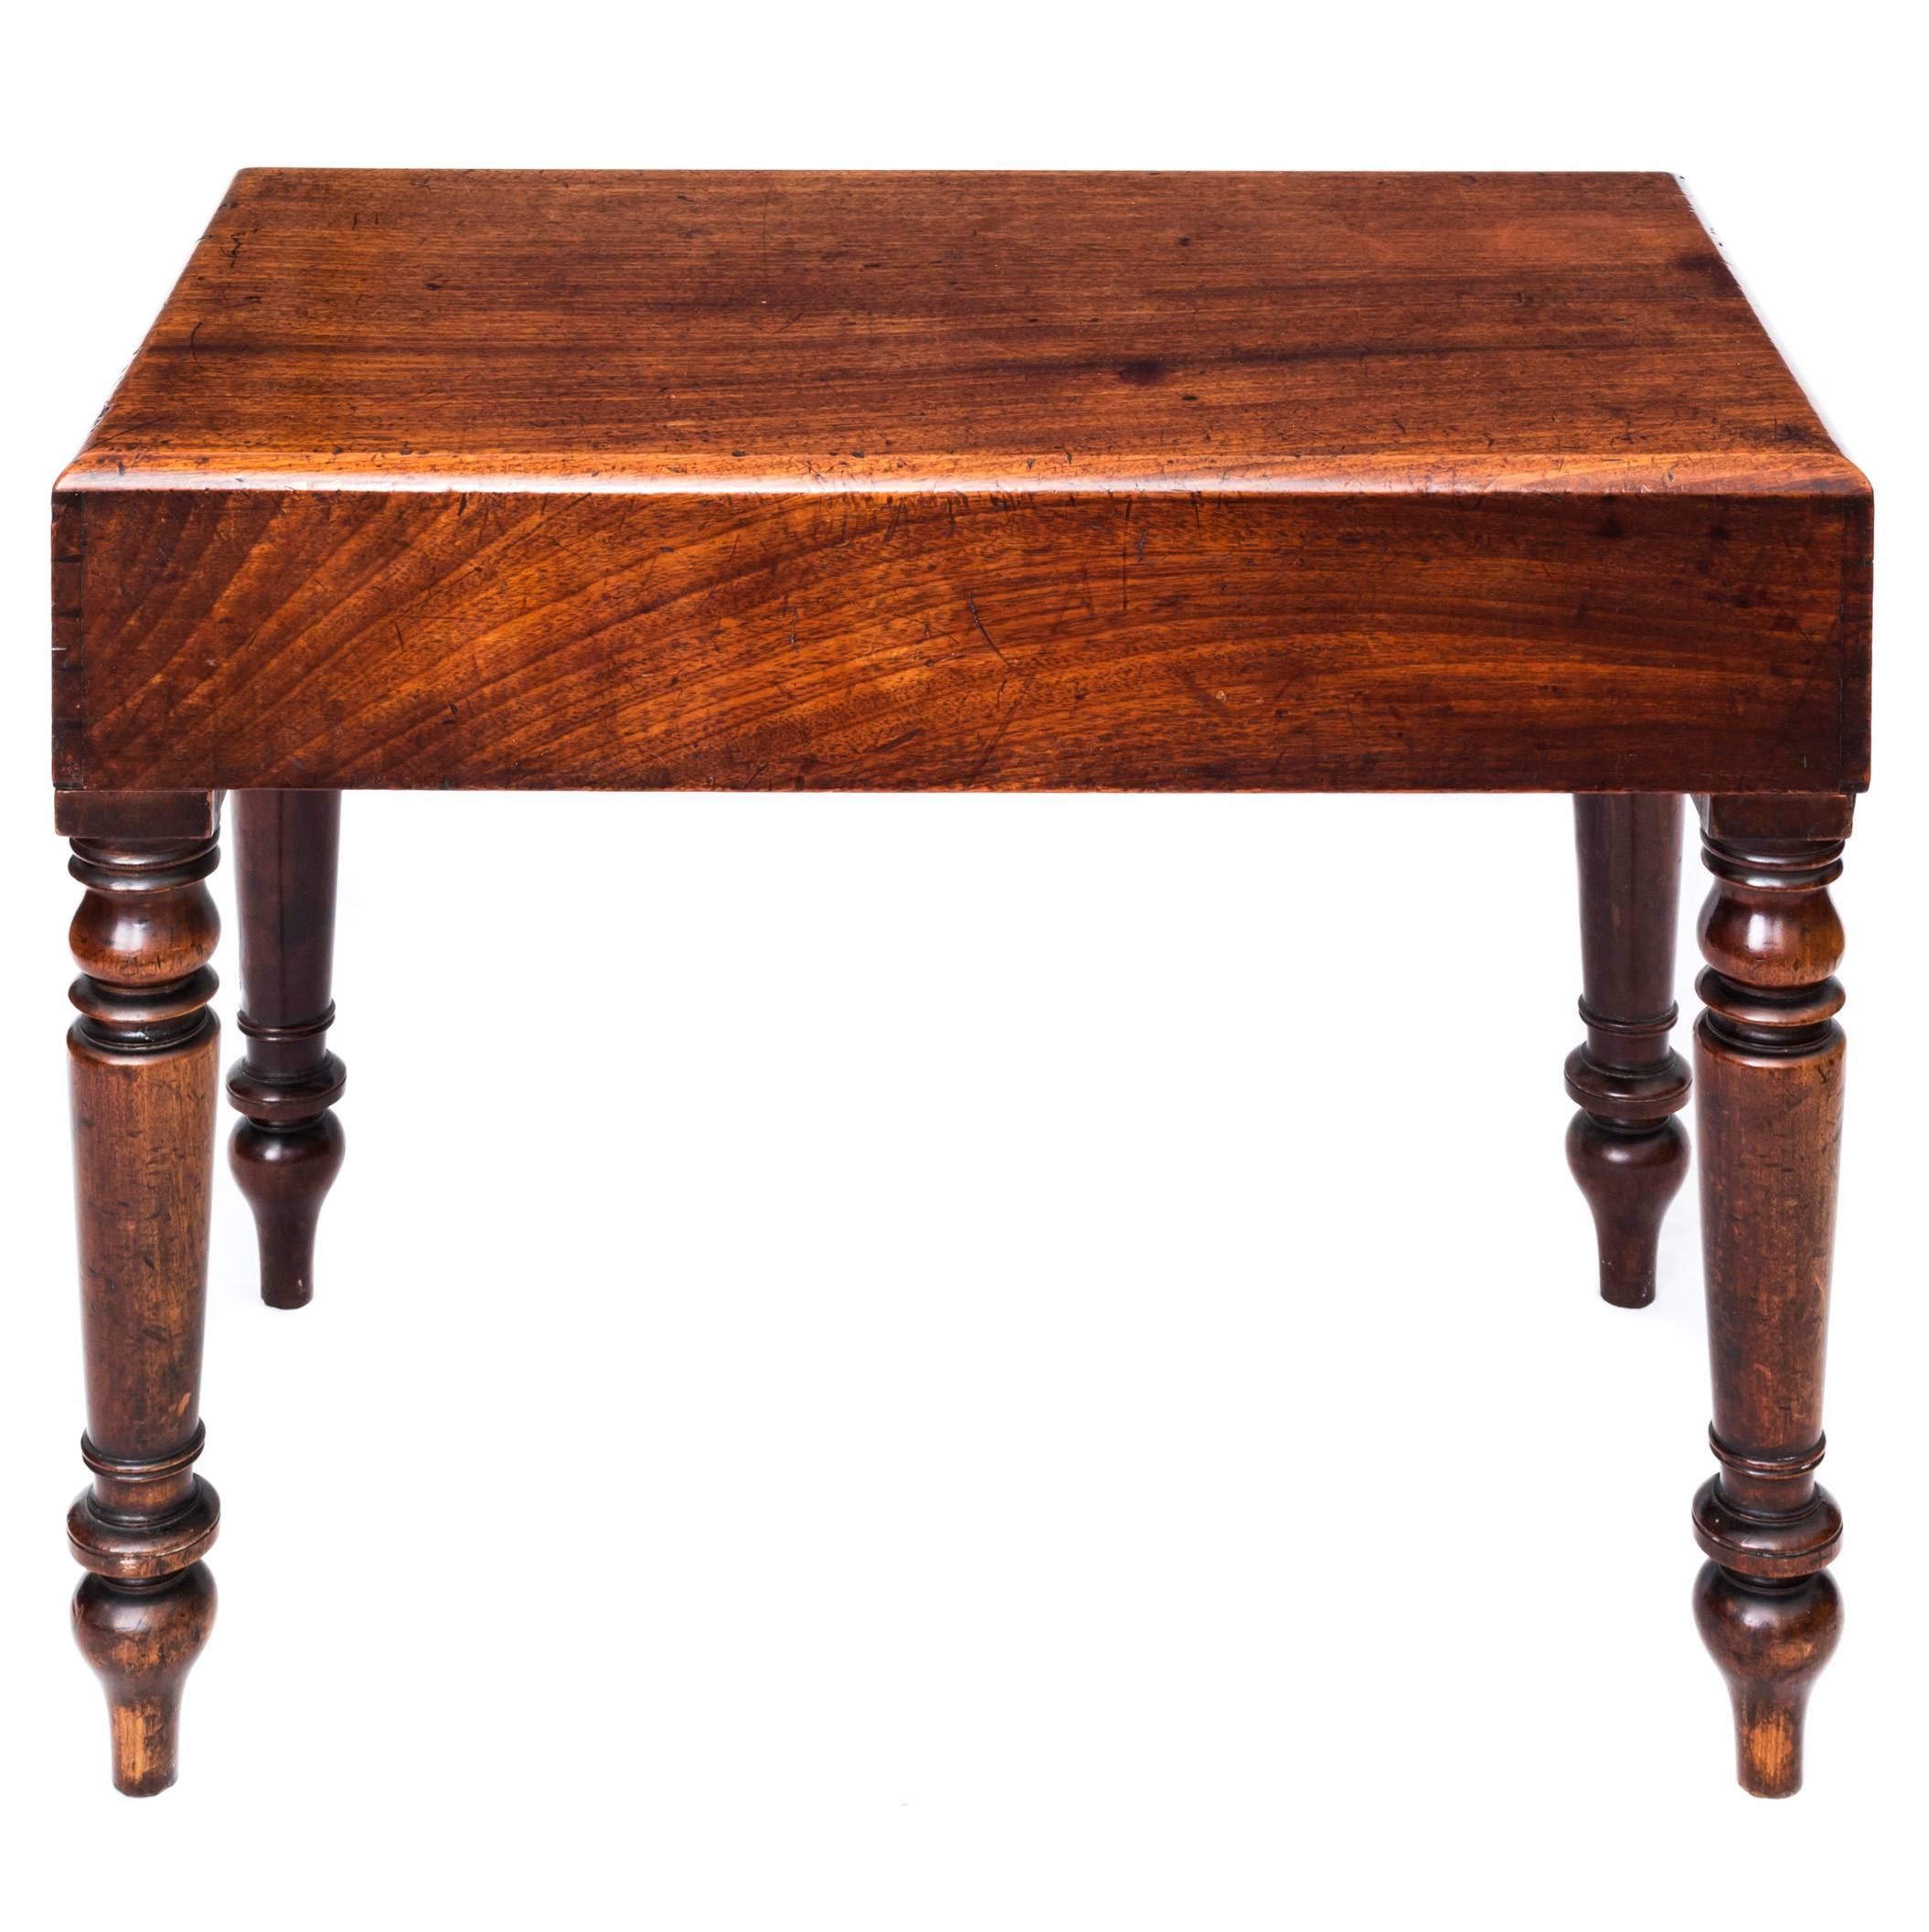 A fine quality Regency period mahogany stool or low table 

English, circa 1820 

Wonderfully versatile piece, ideal for a low coffee table, planter, piano or dressing stool. The rectangular box-shaped tray top, finely dovetailed, made of high